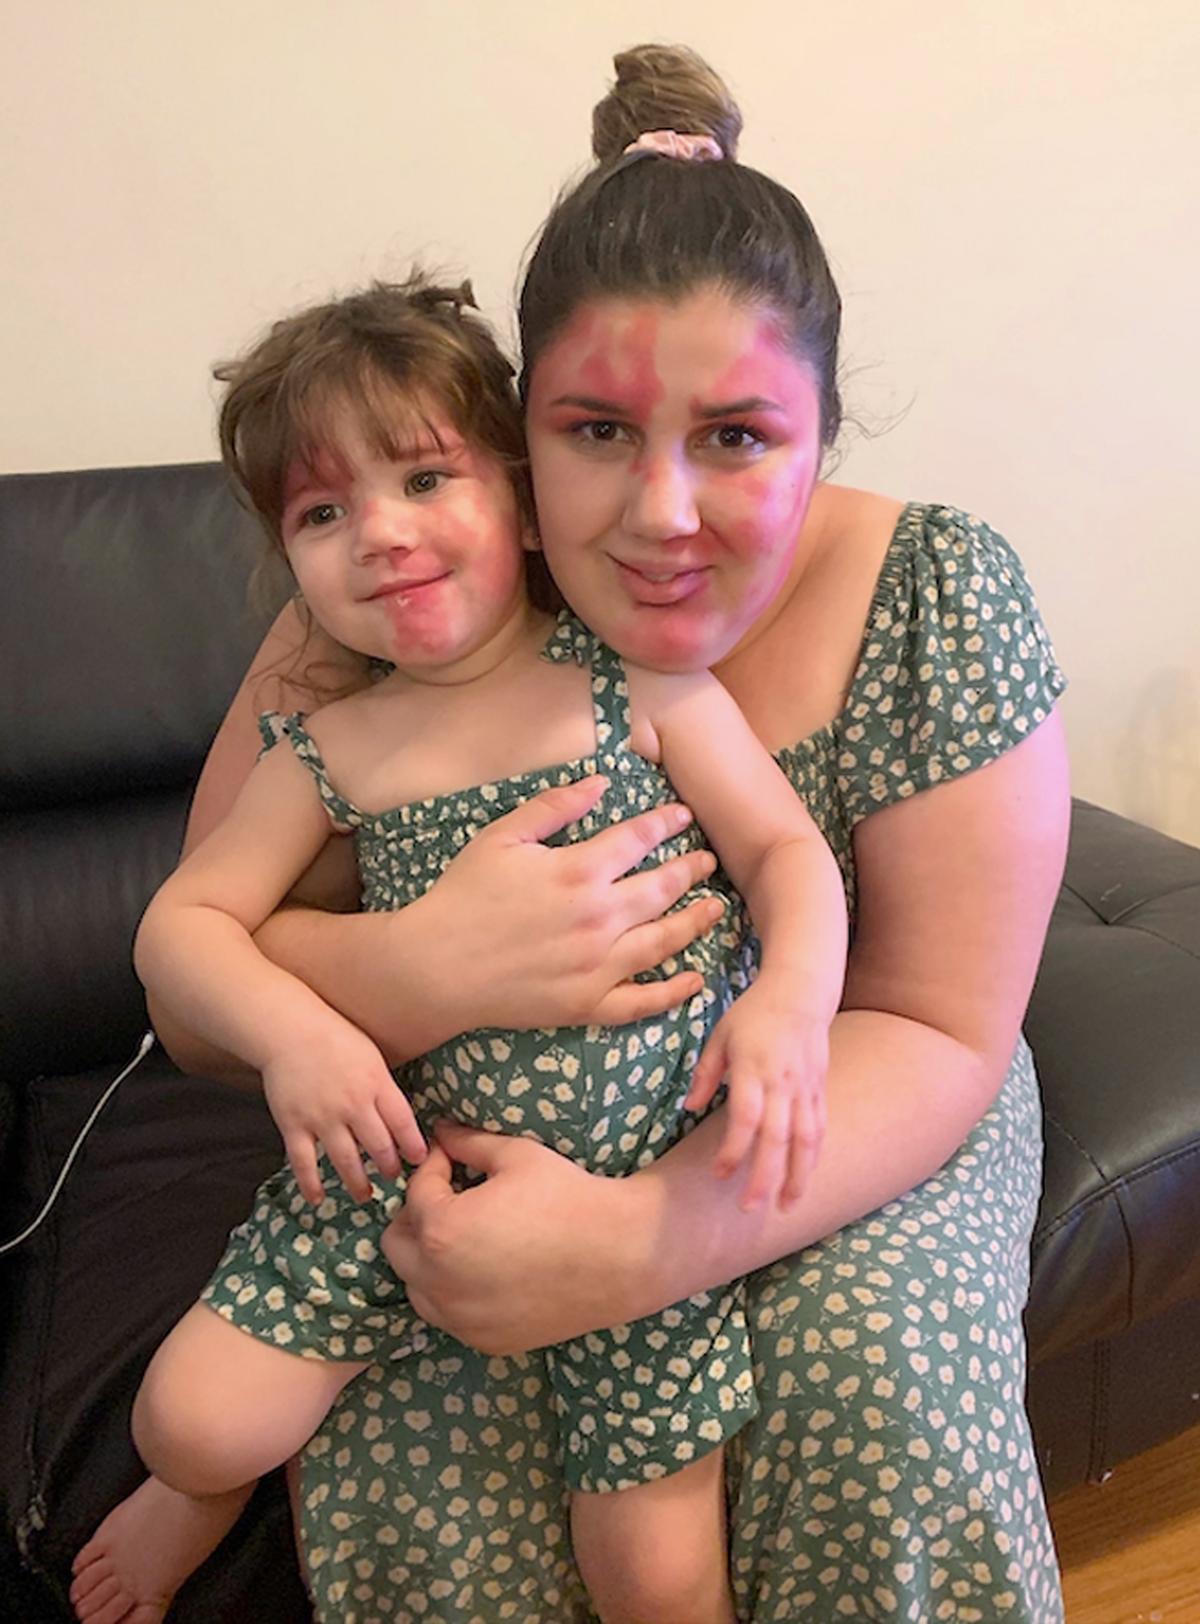 Marianna Bowering matching her daughter Angelica's dress and unique facial birthmark. (Caters News)